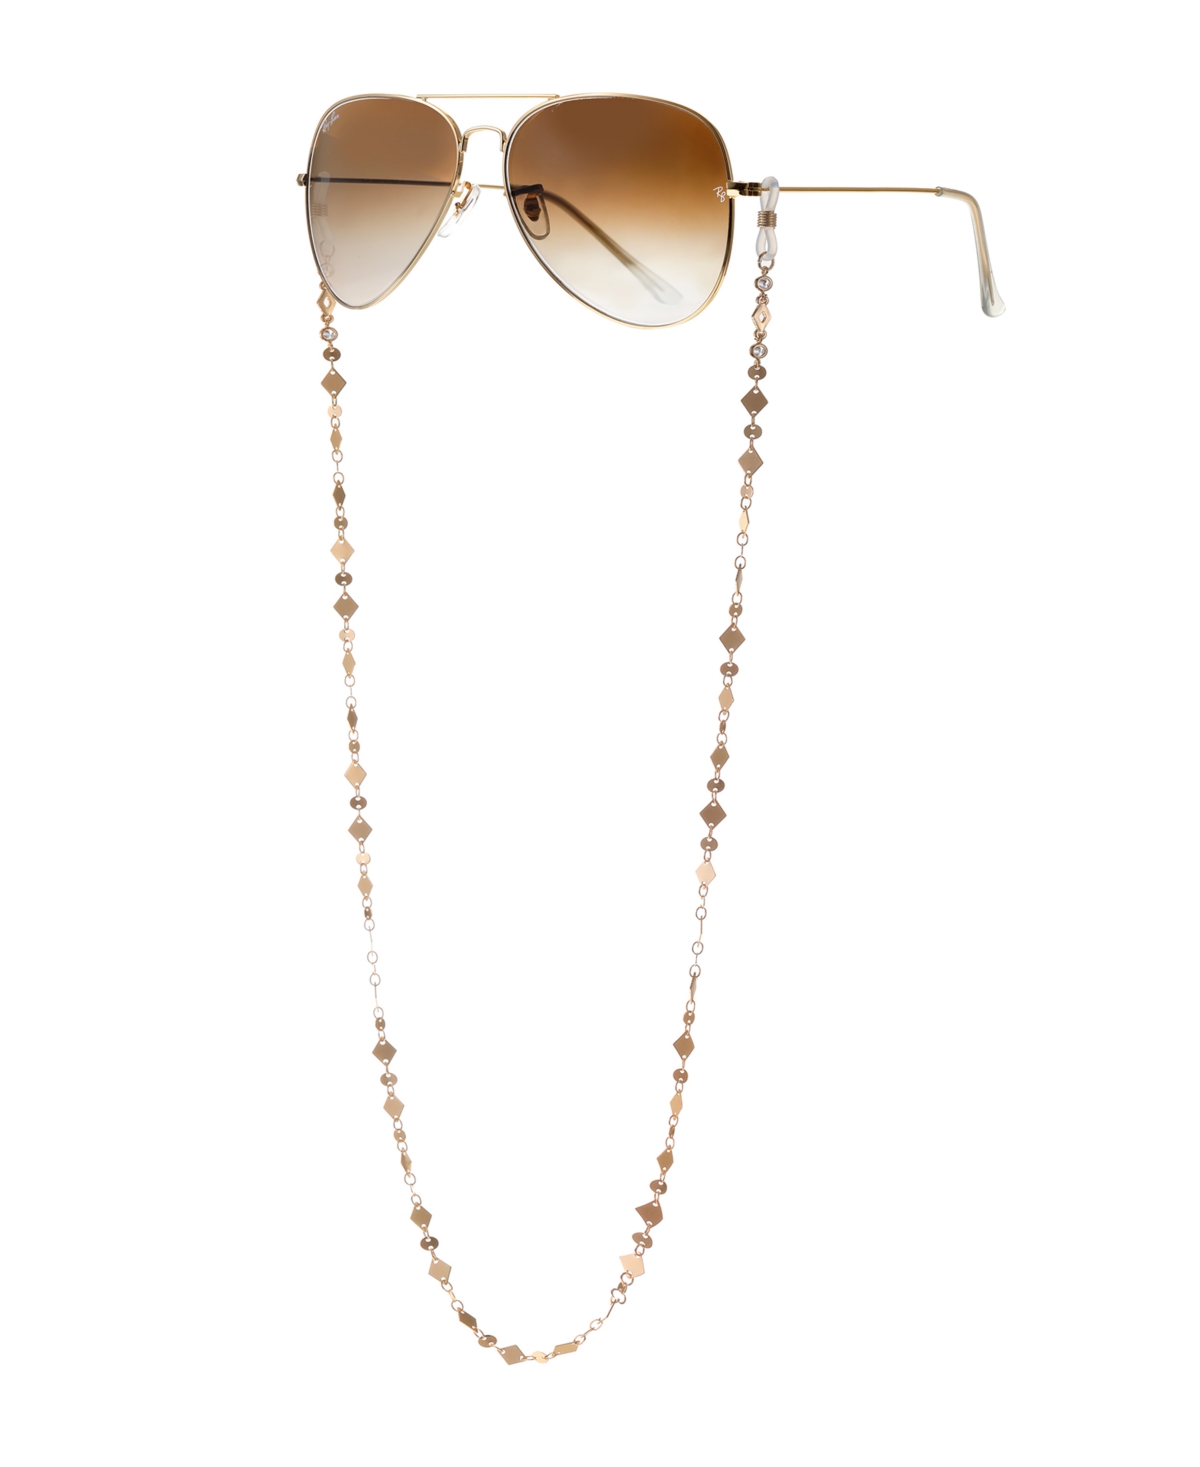 Women's 18k Gold Plated Real Aces Glasses Chain - Gold-Plated